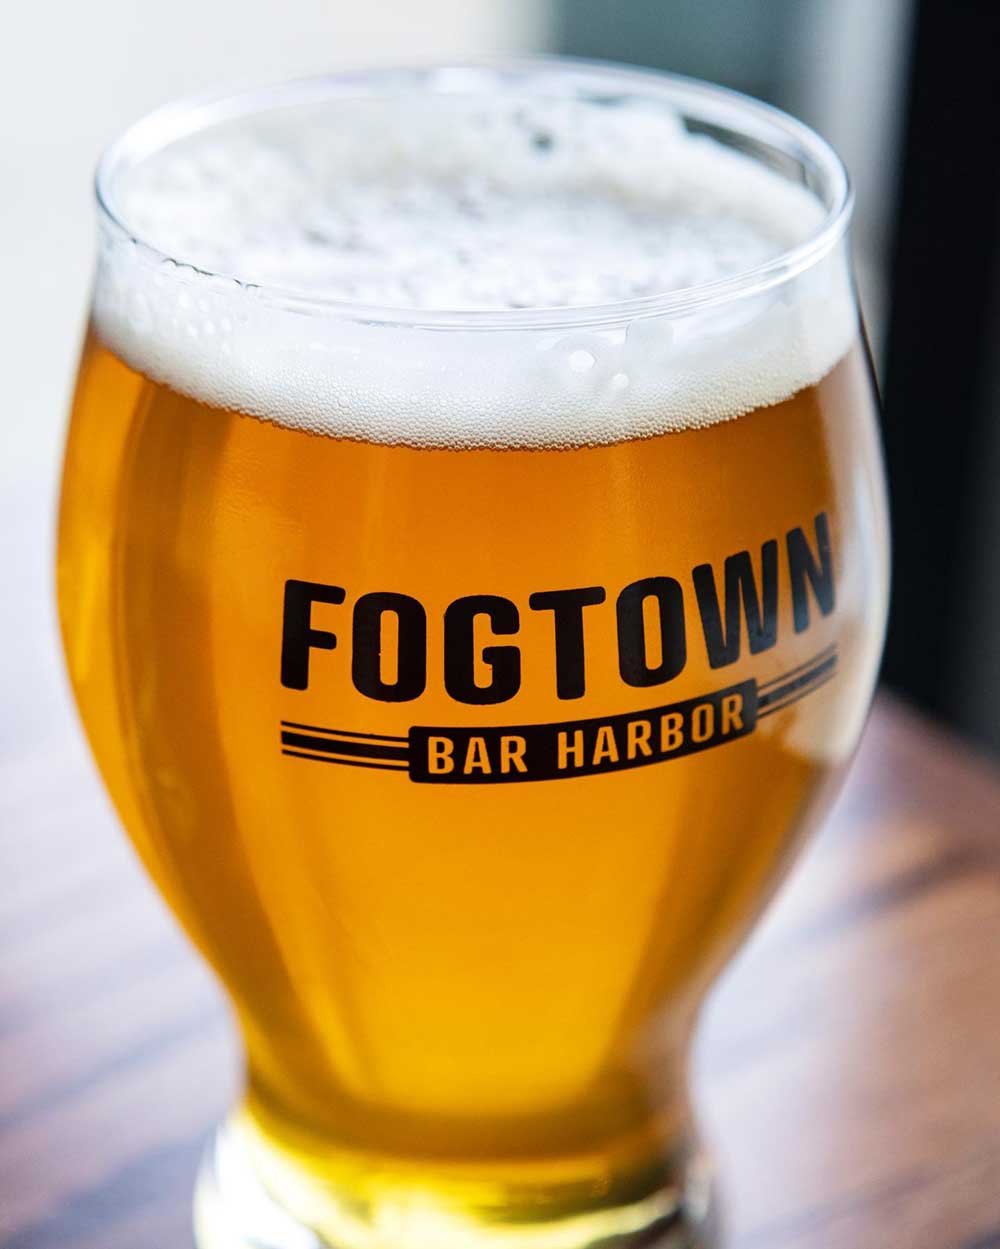 Beer in glass with Fogtown Bar Harbor logo.